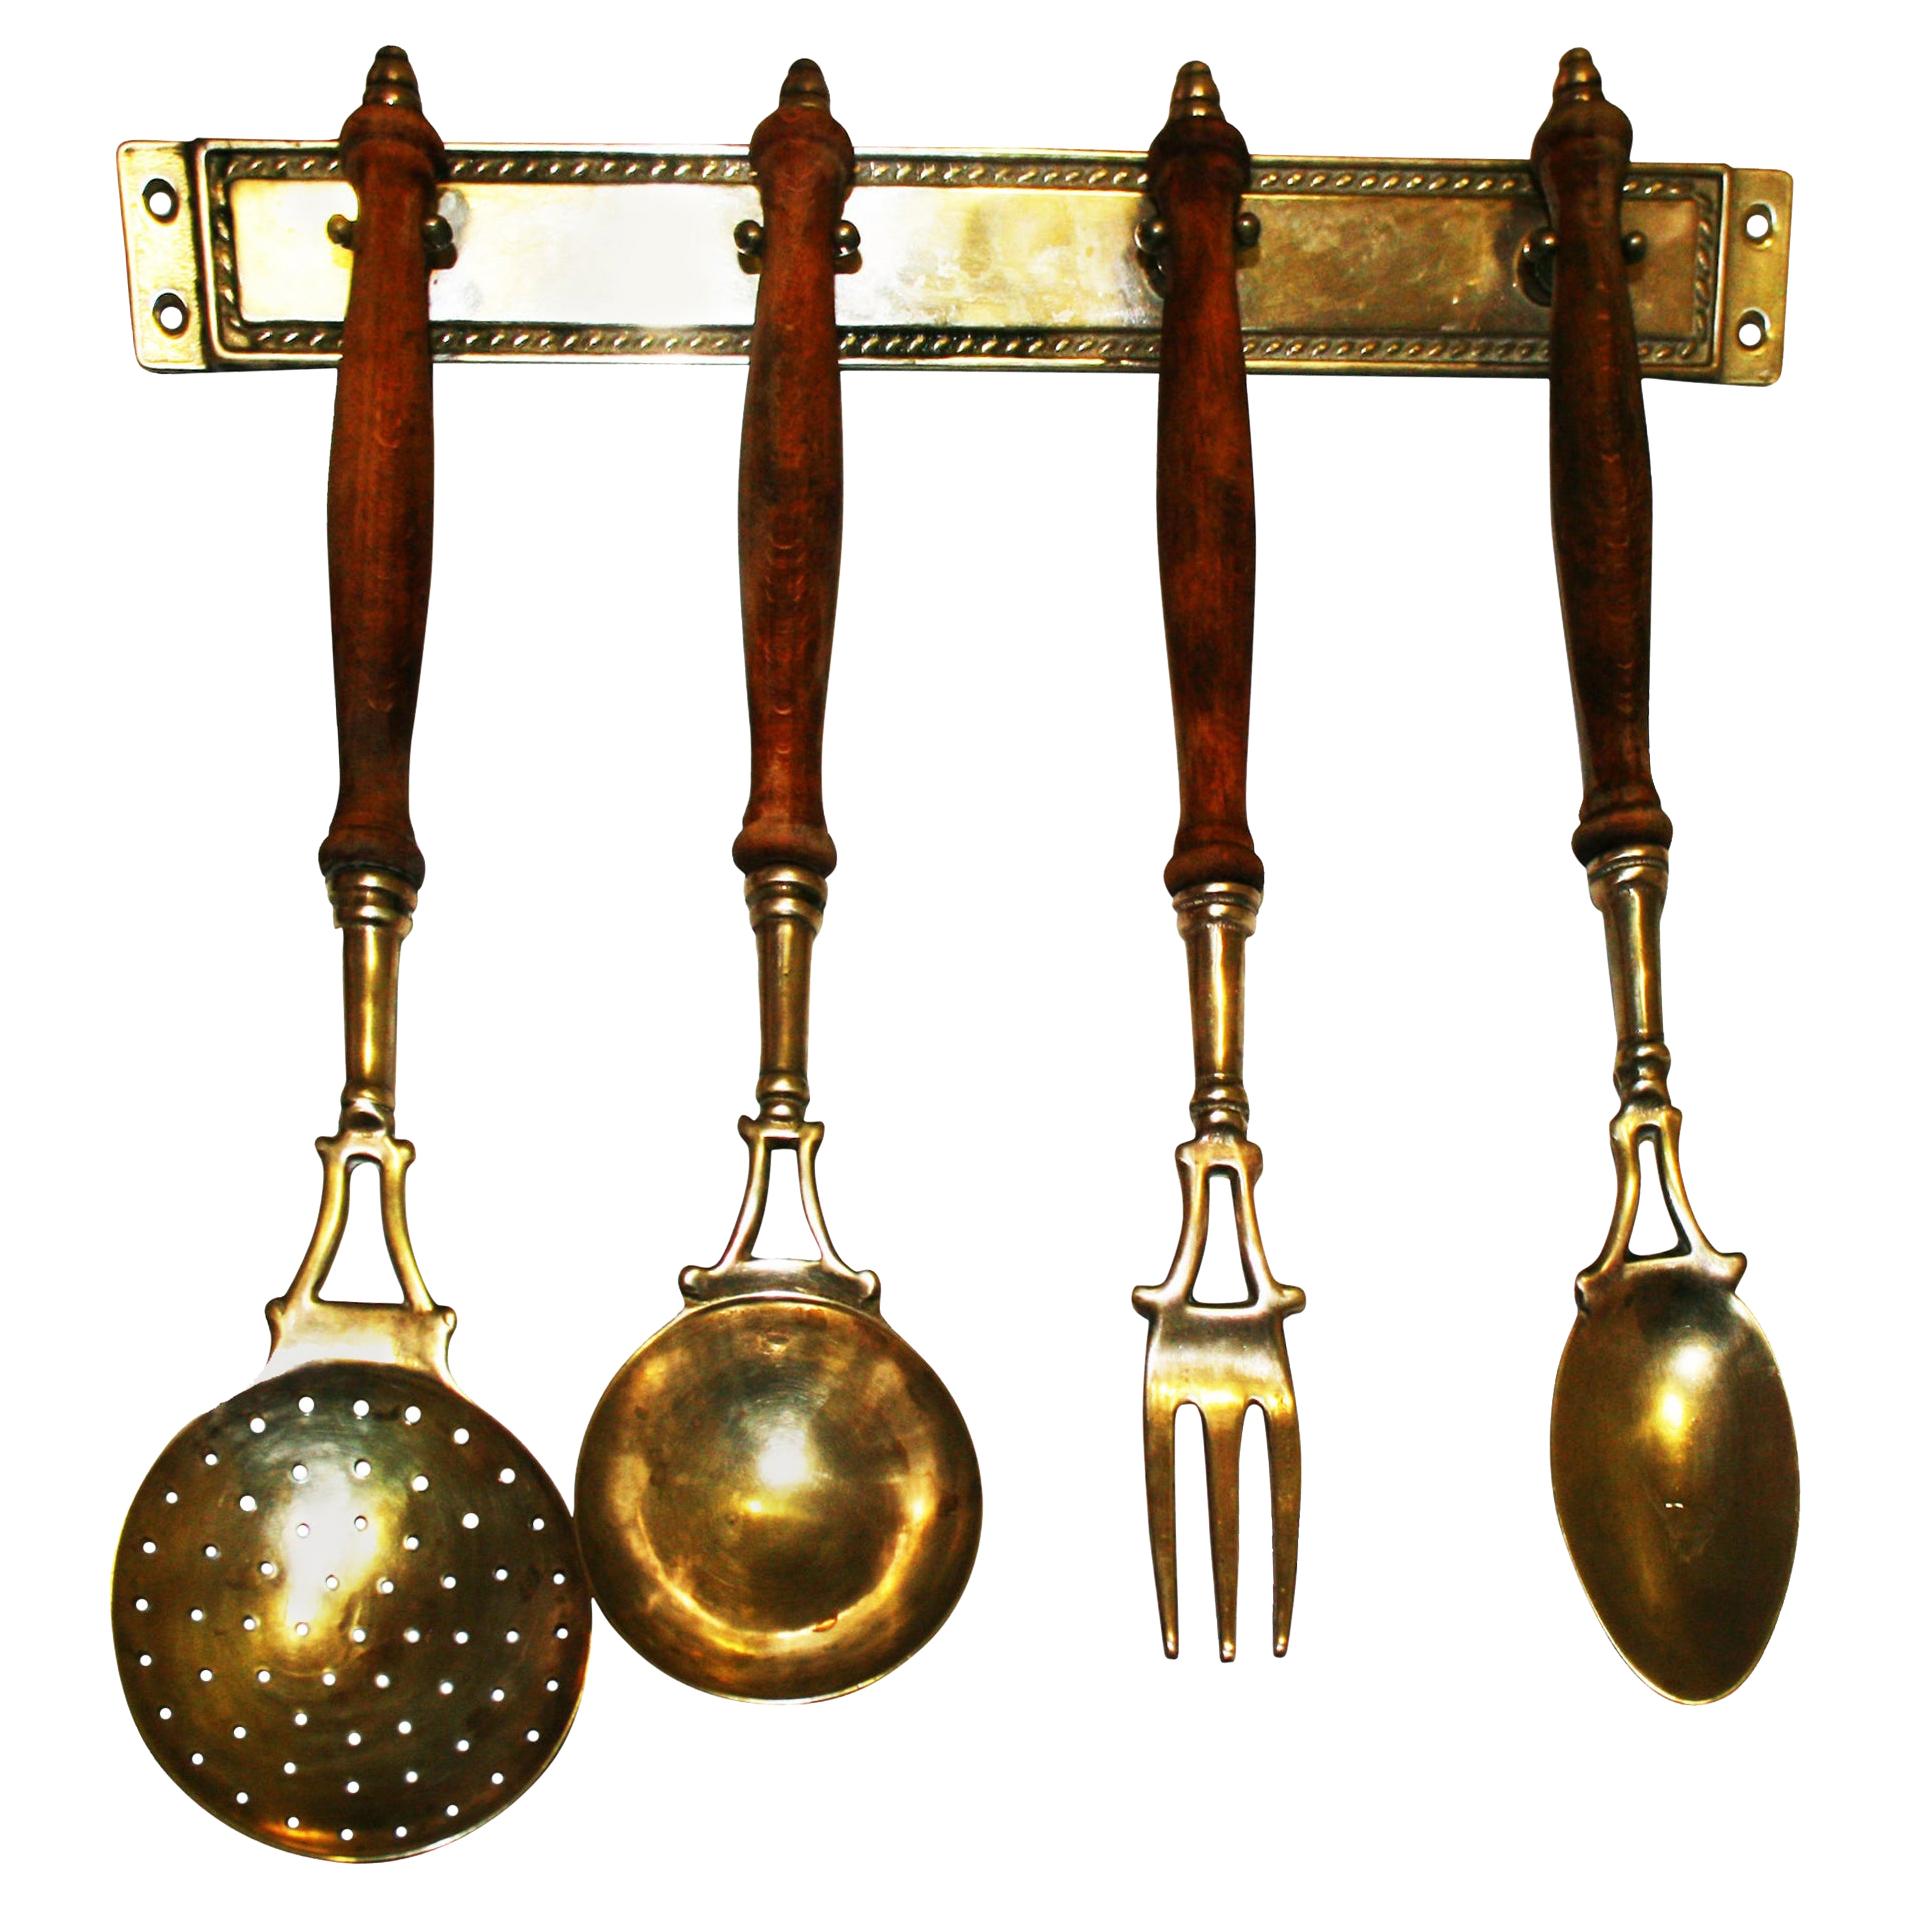 Brass Old Kitchen Utensils with from a Hanging Bar, Early 20th Century